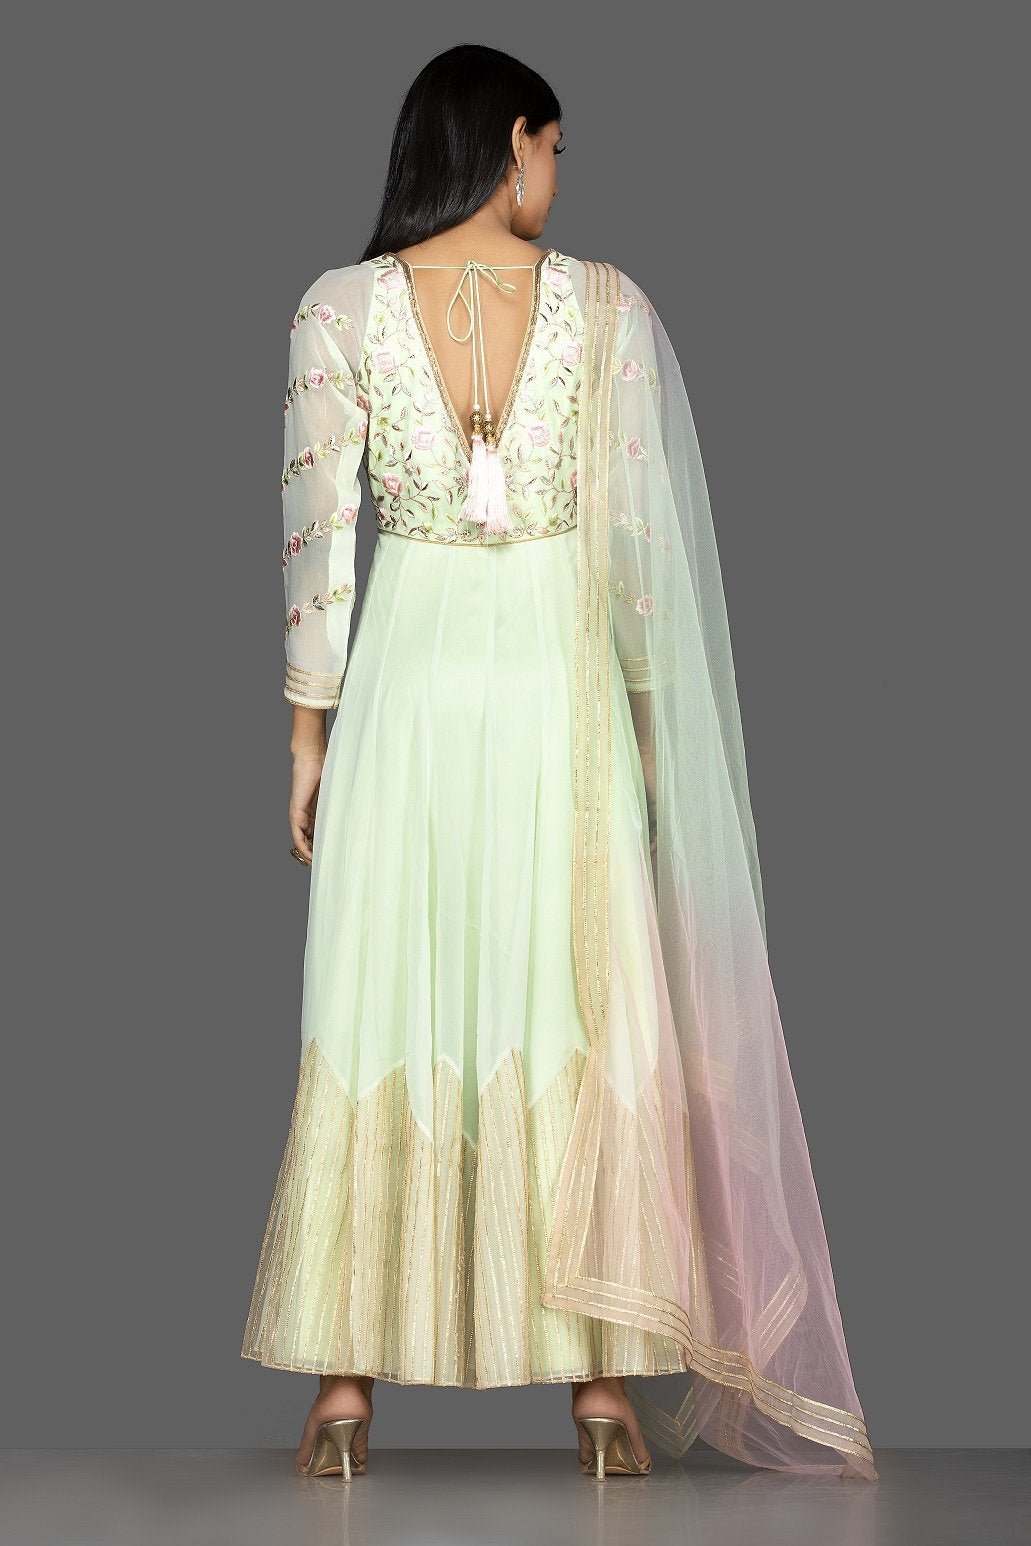 Buy mint green embroidered net floorlength Anarkali online in USA with dupatta. Spread ethnic elegance on weddings and special occasions in splendid designer lehengas, Anarkali suits crafted with exquisite Indian craftsmanship from Pure Elegance Indian fashion store in USA.-back